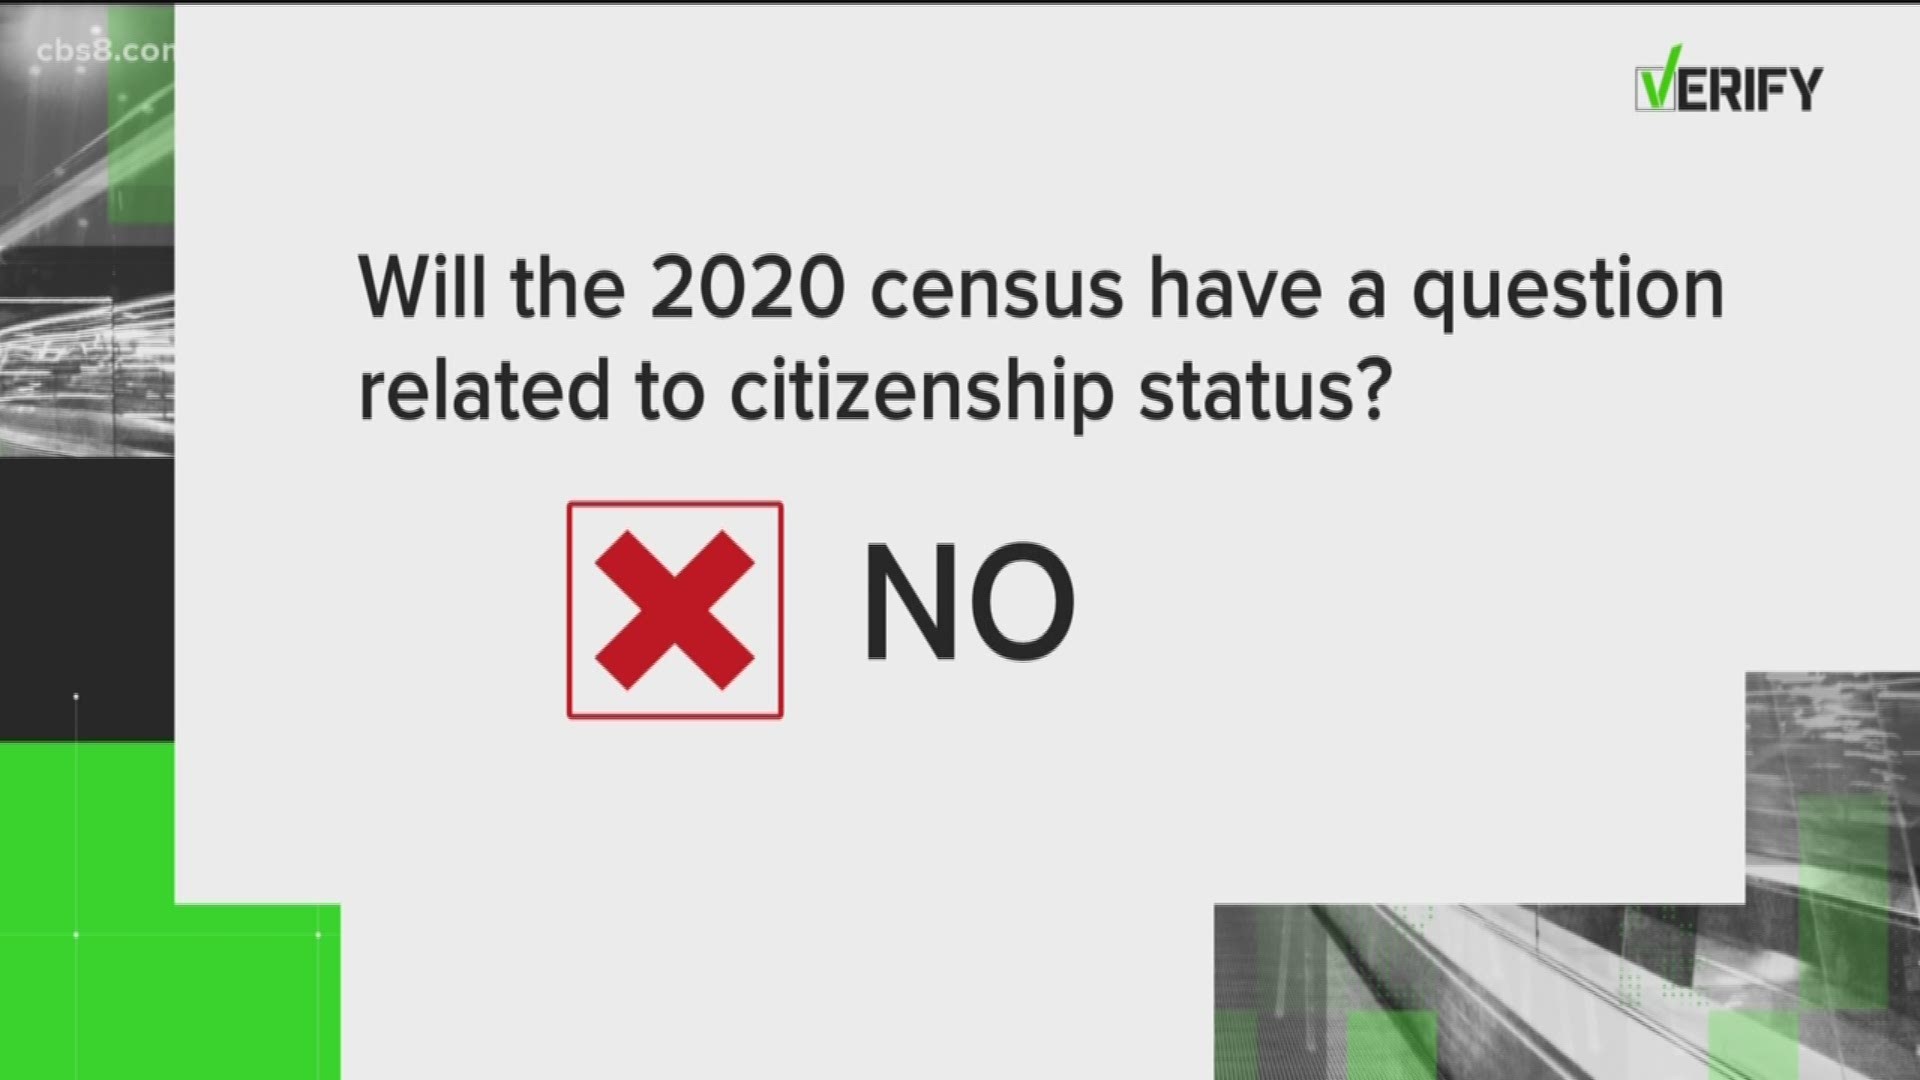 he 2020 Census will not have a citizenship related question. The 2020 Census documents, however, will include questions about: sex, residence, and race.